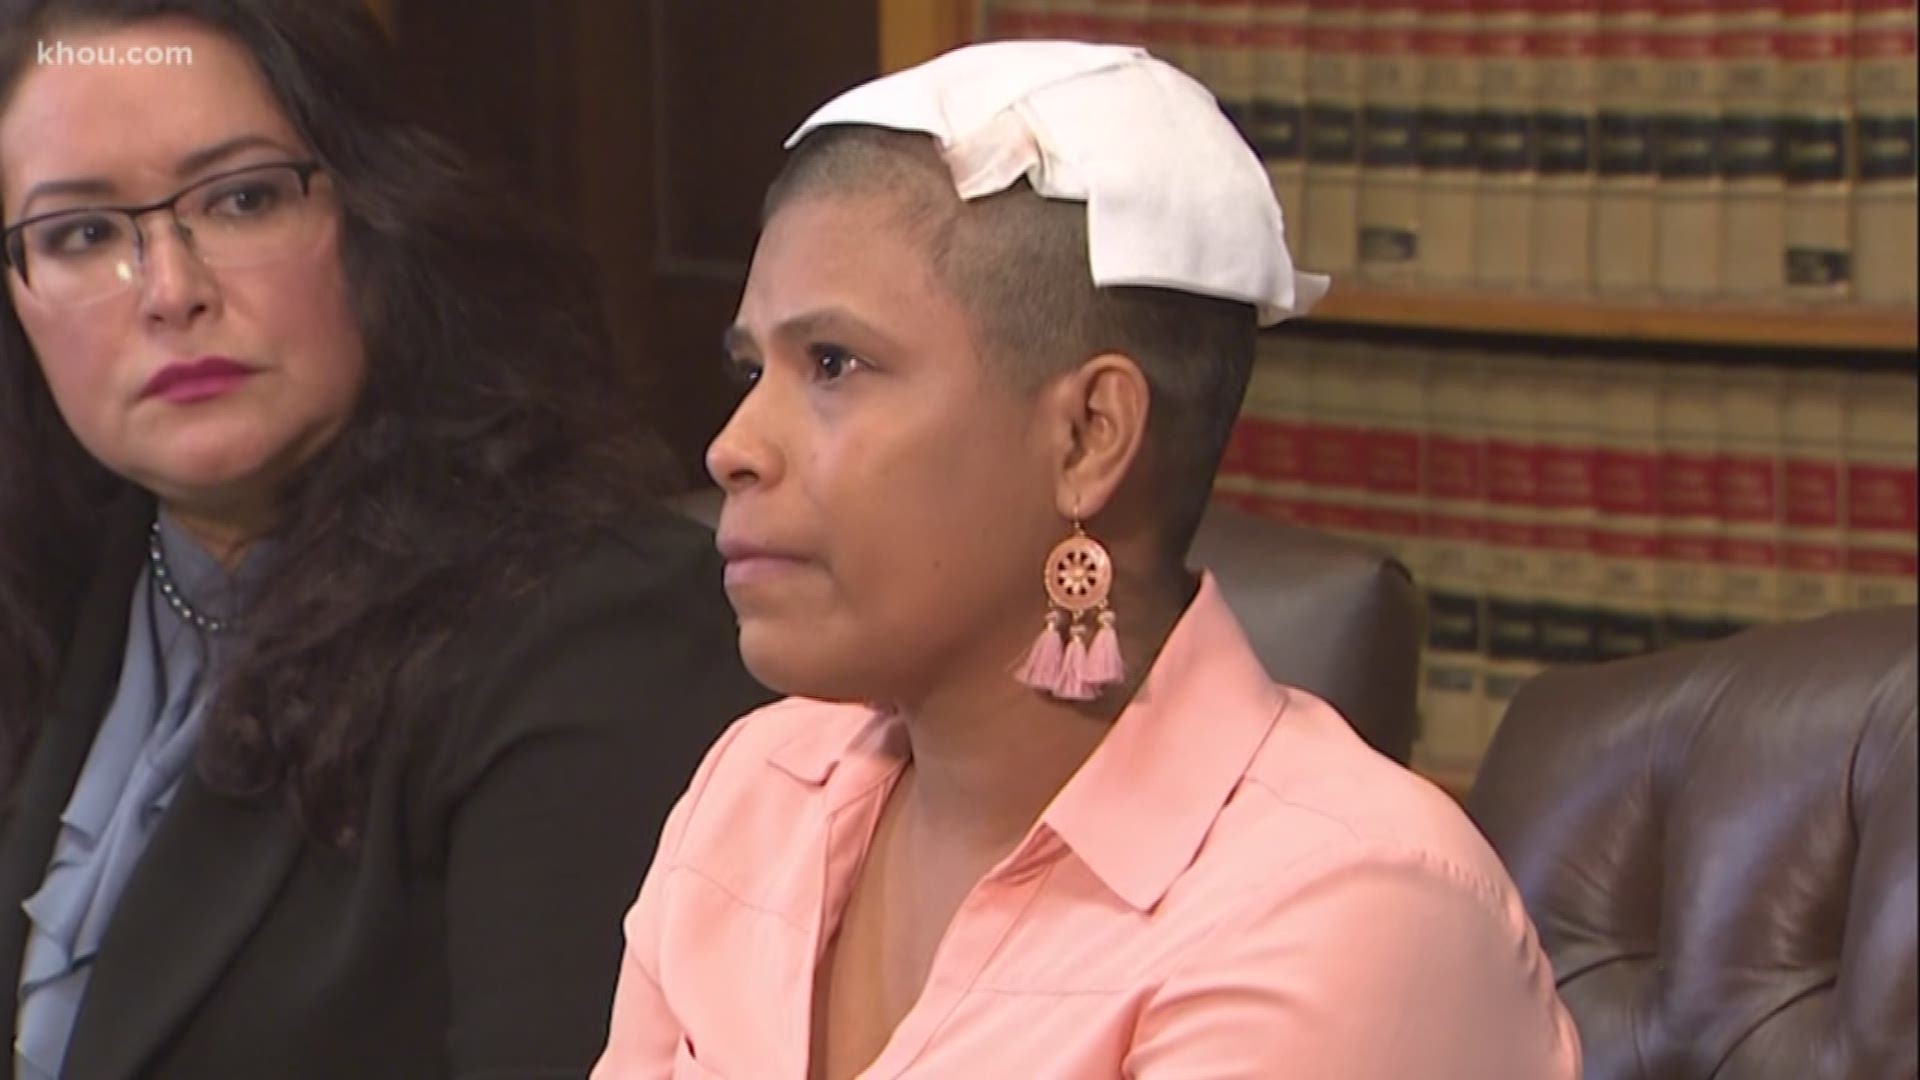 A Houston woman went to a salon to get highlights and she left with third-degree burns on her scalp. She's speaking out so this doesn't happen to anyone else.